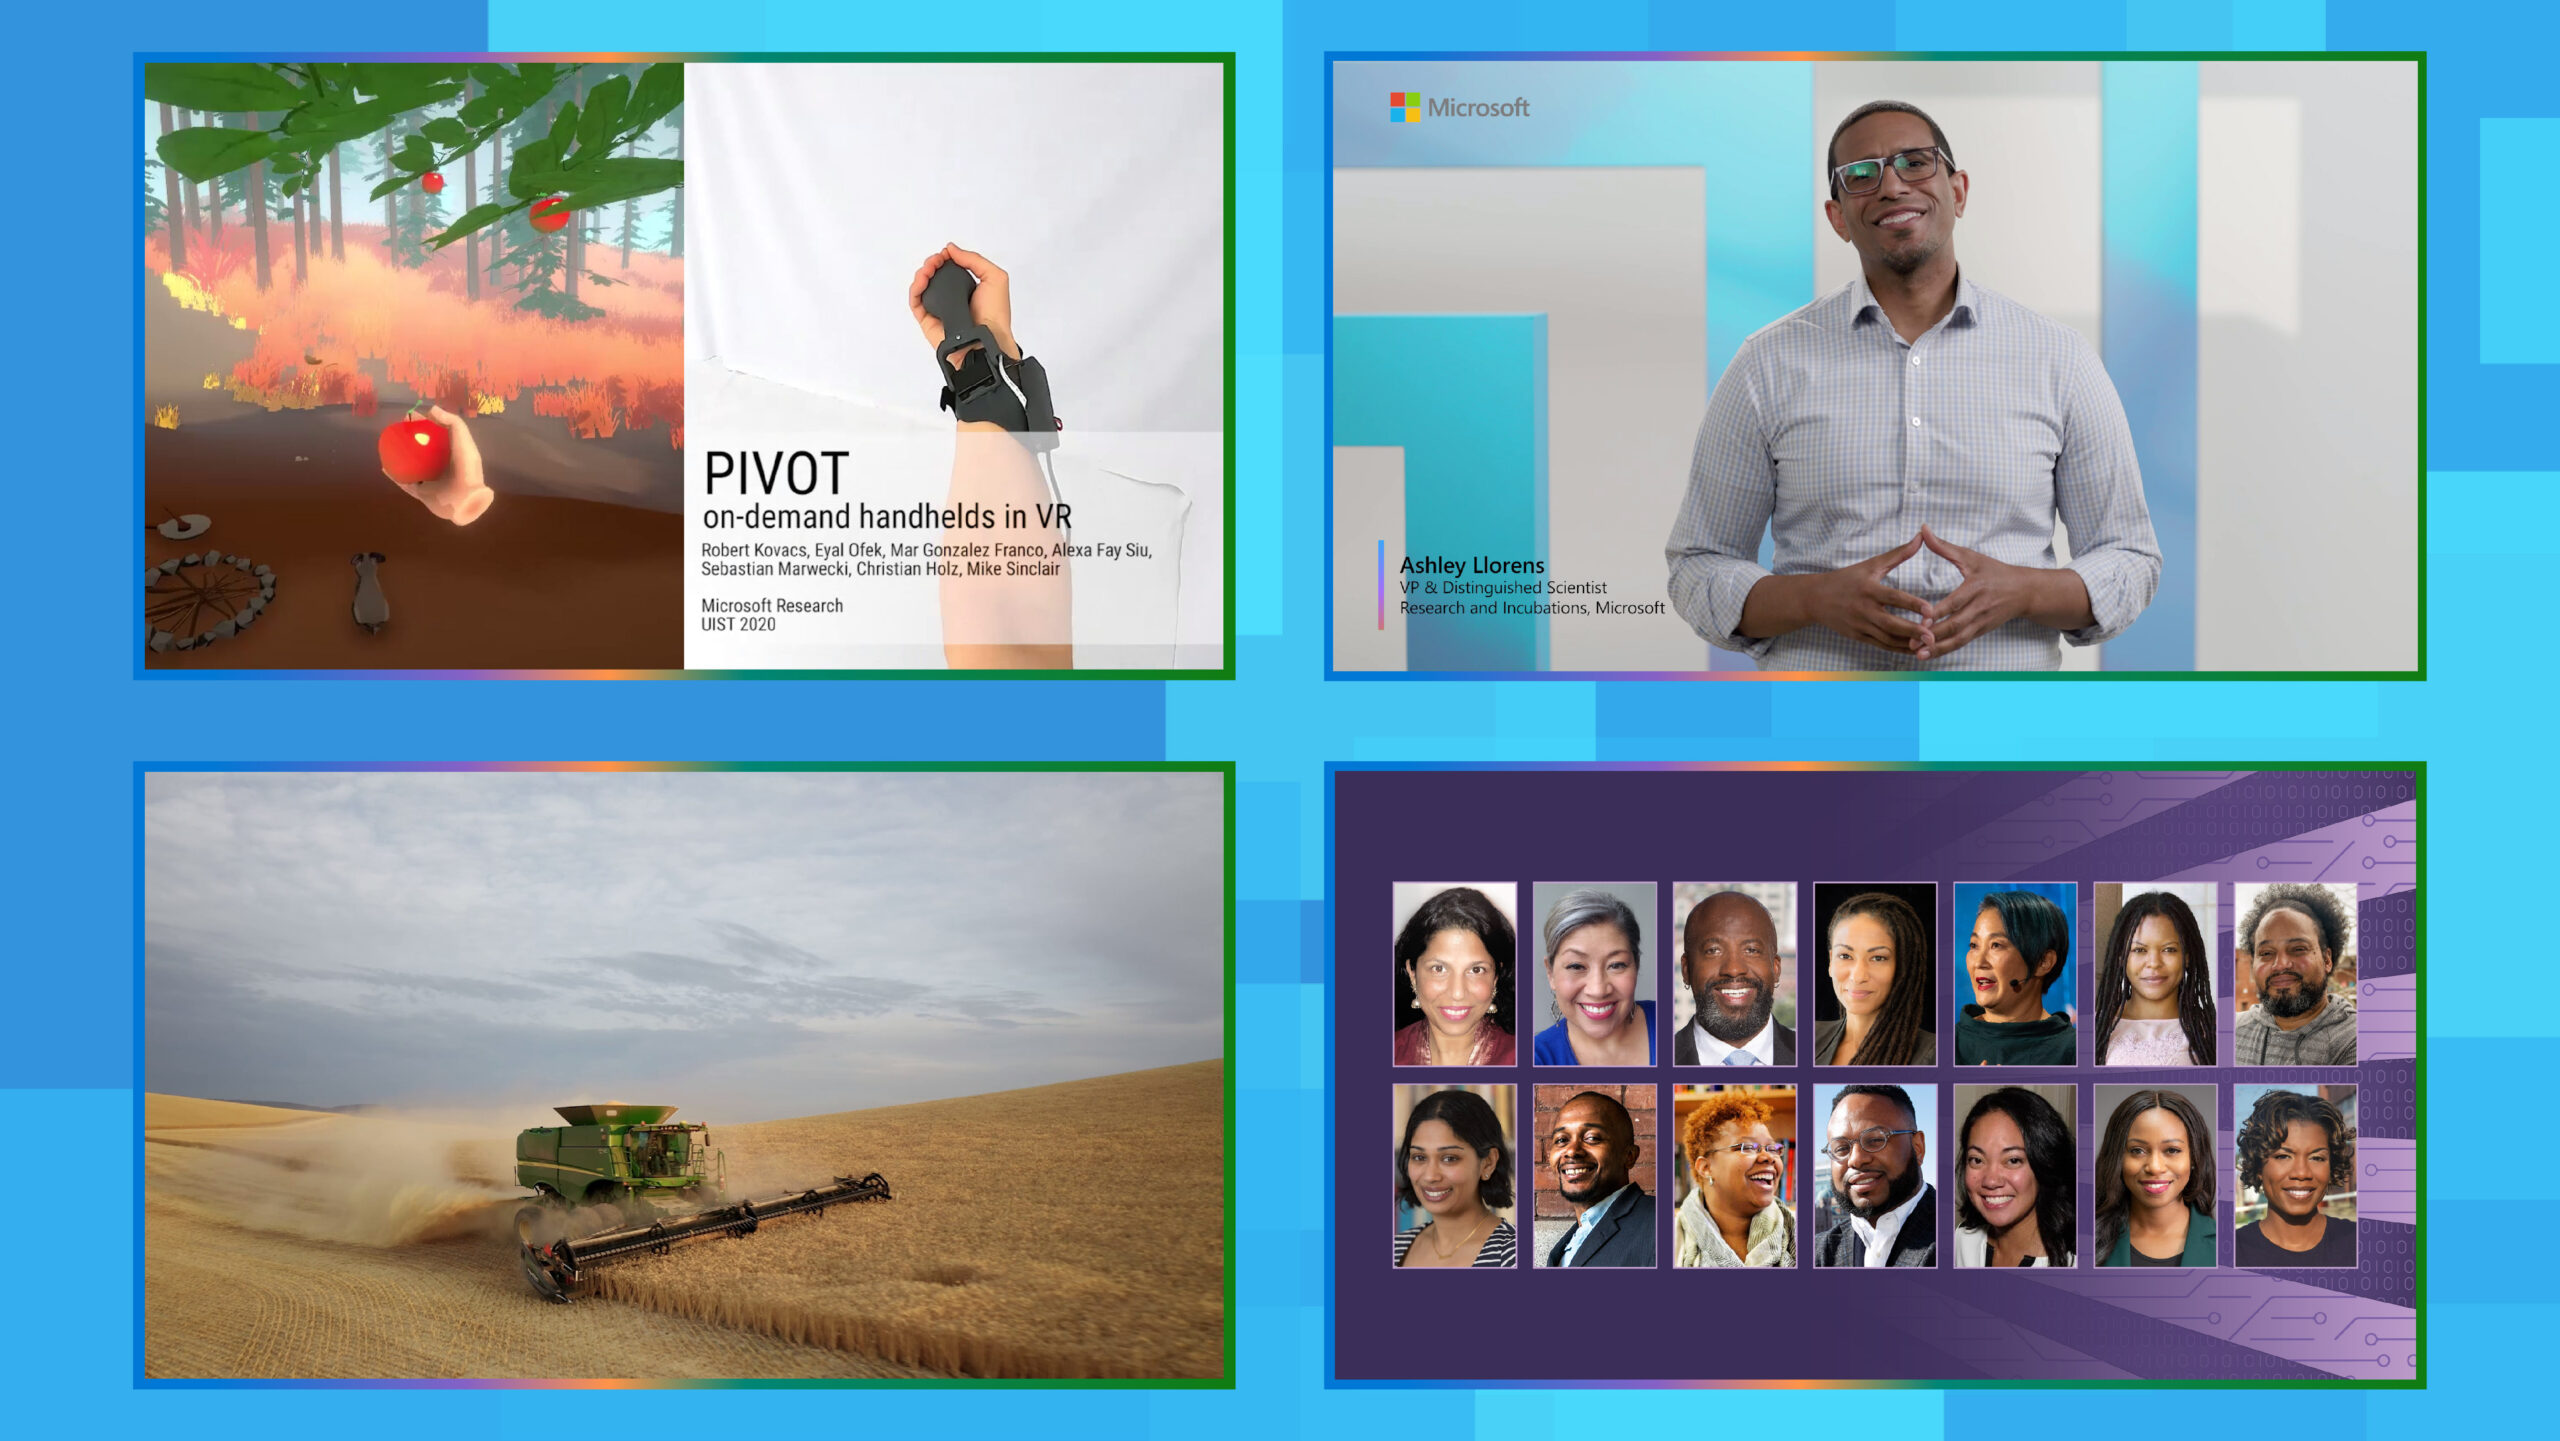 Four images highlighting: PIVOT, Ashley Llorens, farming, Race and Technology series